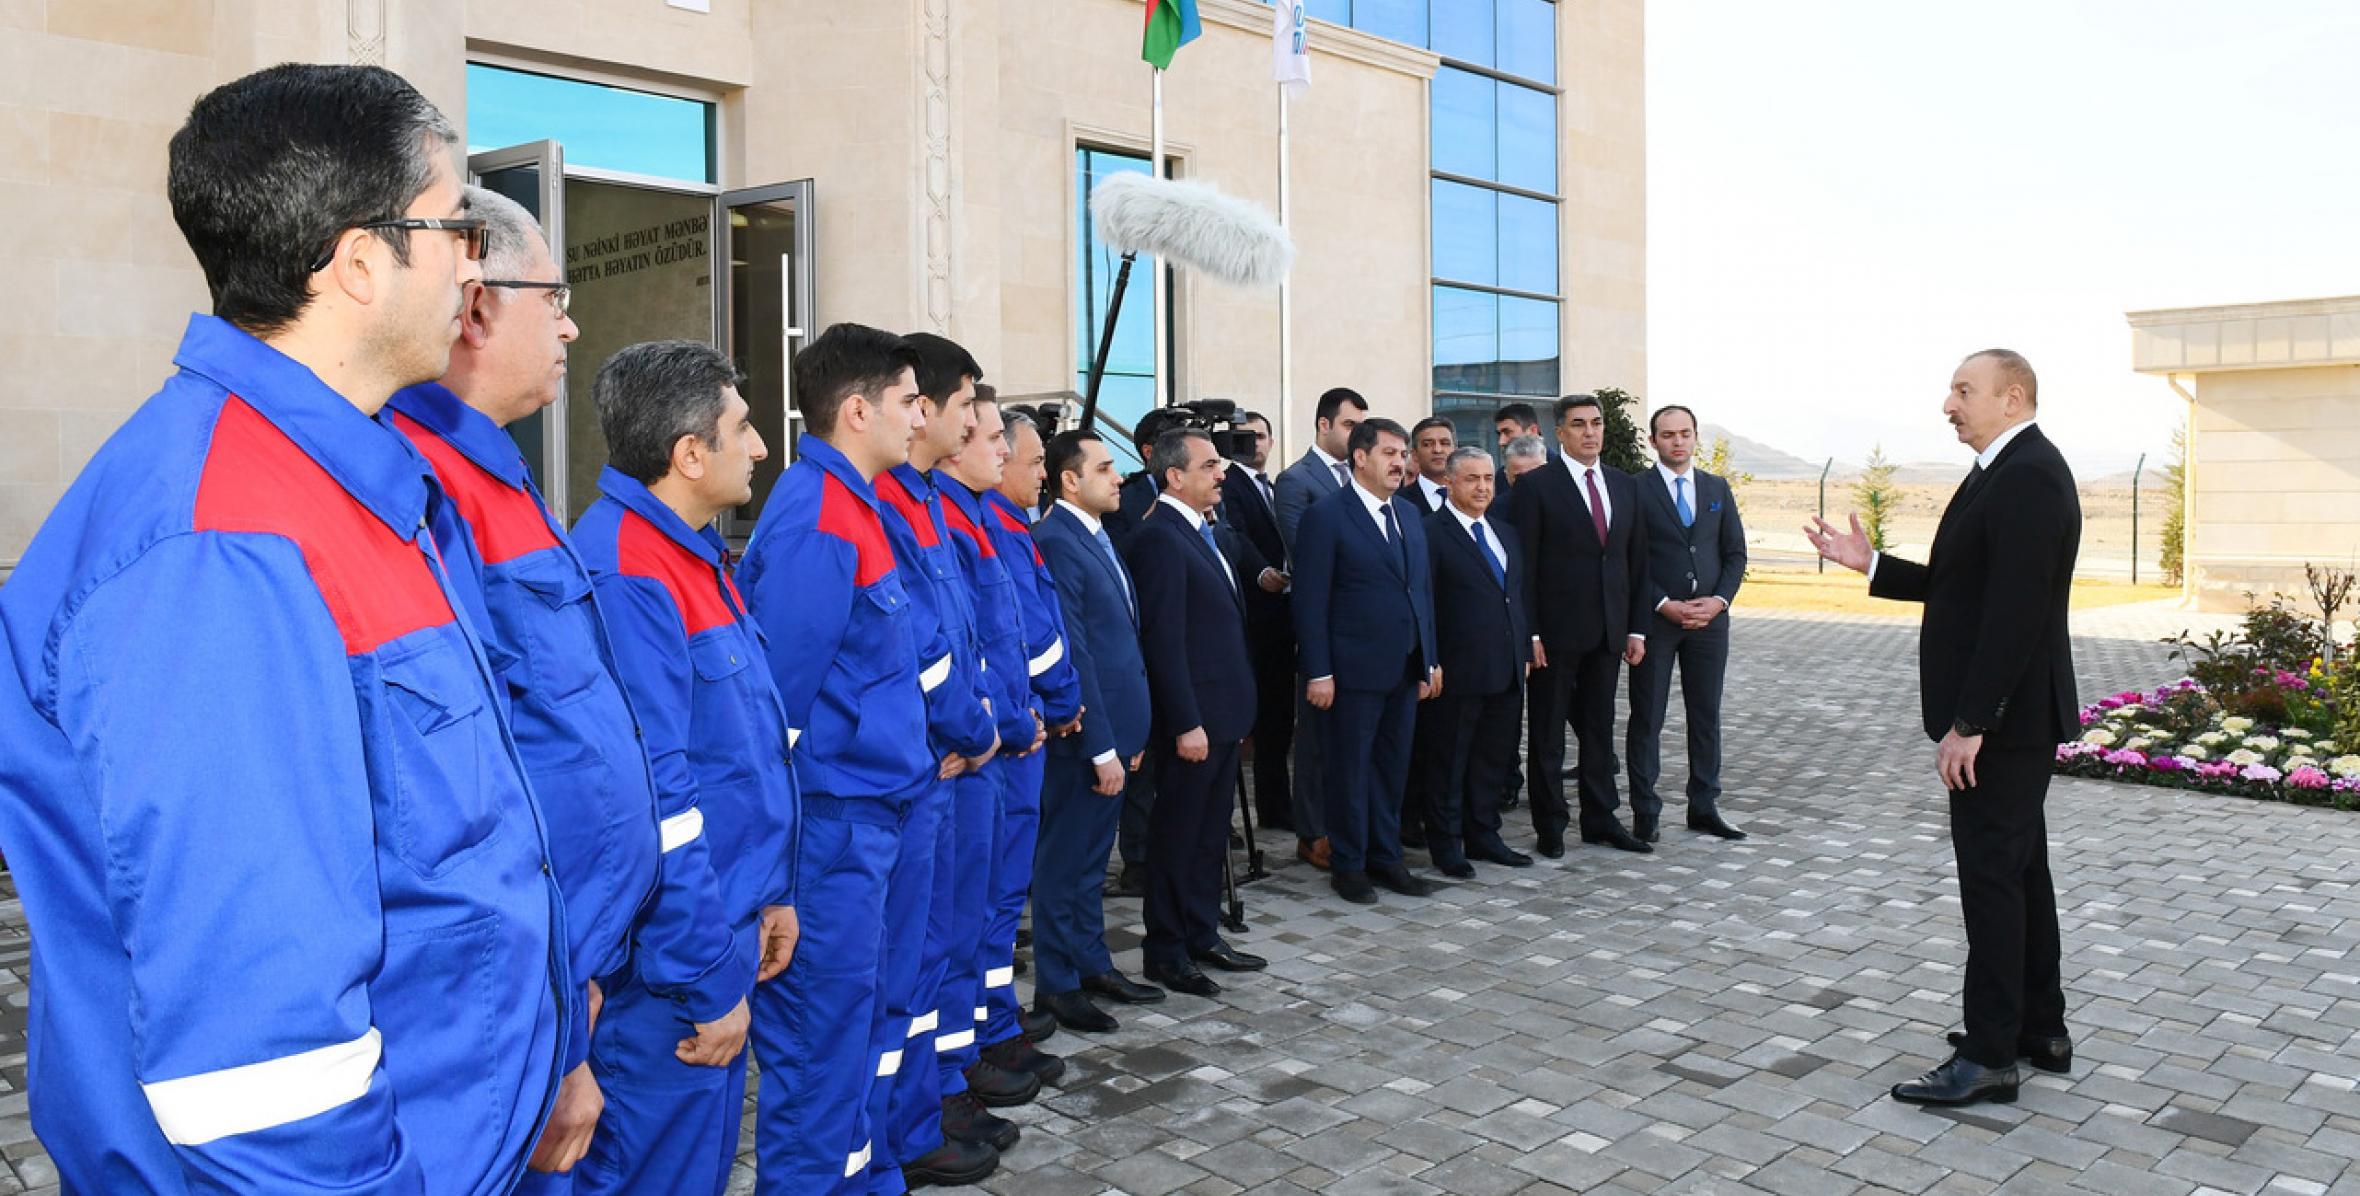 Speech by Ilham Aliyev at the opening ceremony of the Shamkirchay water treatment facility